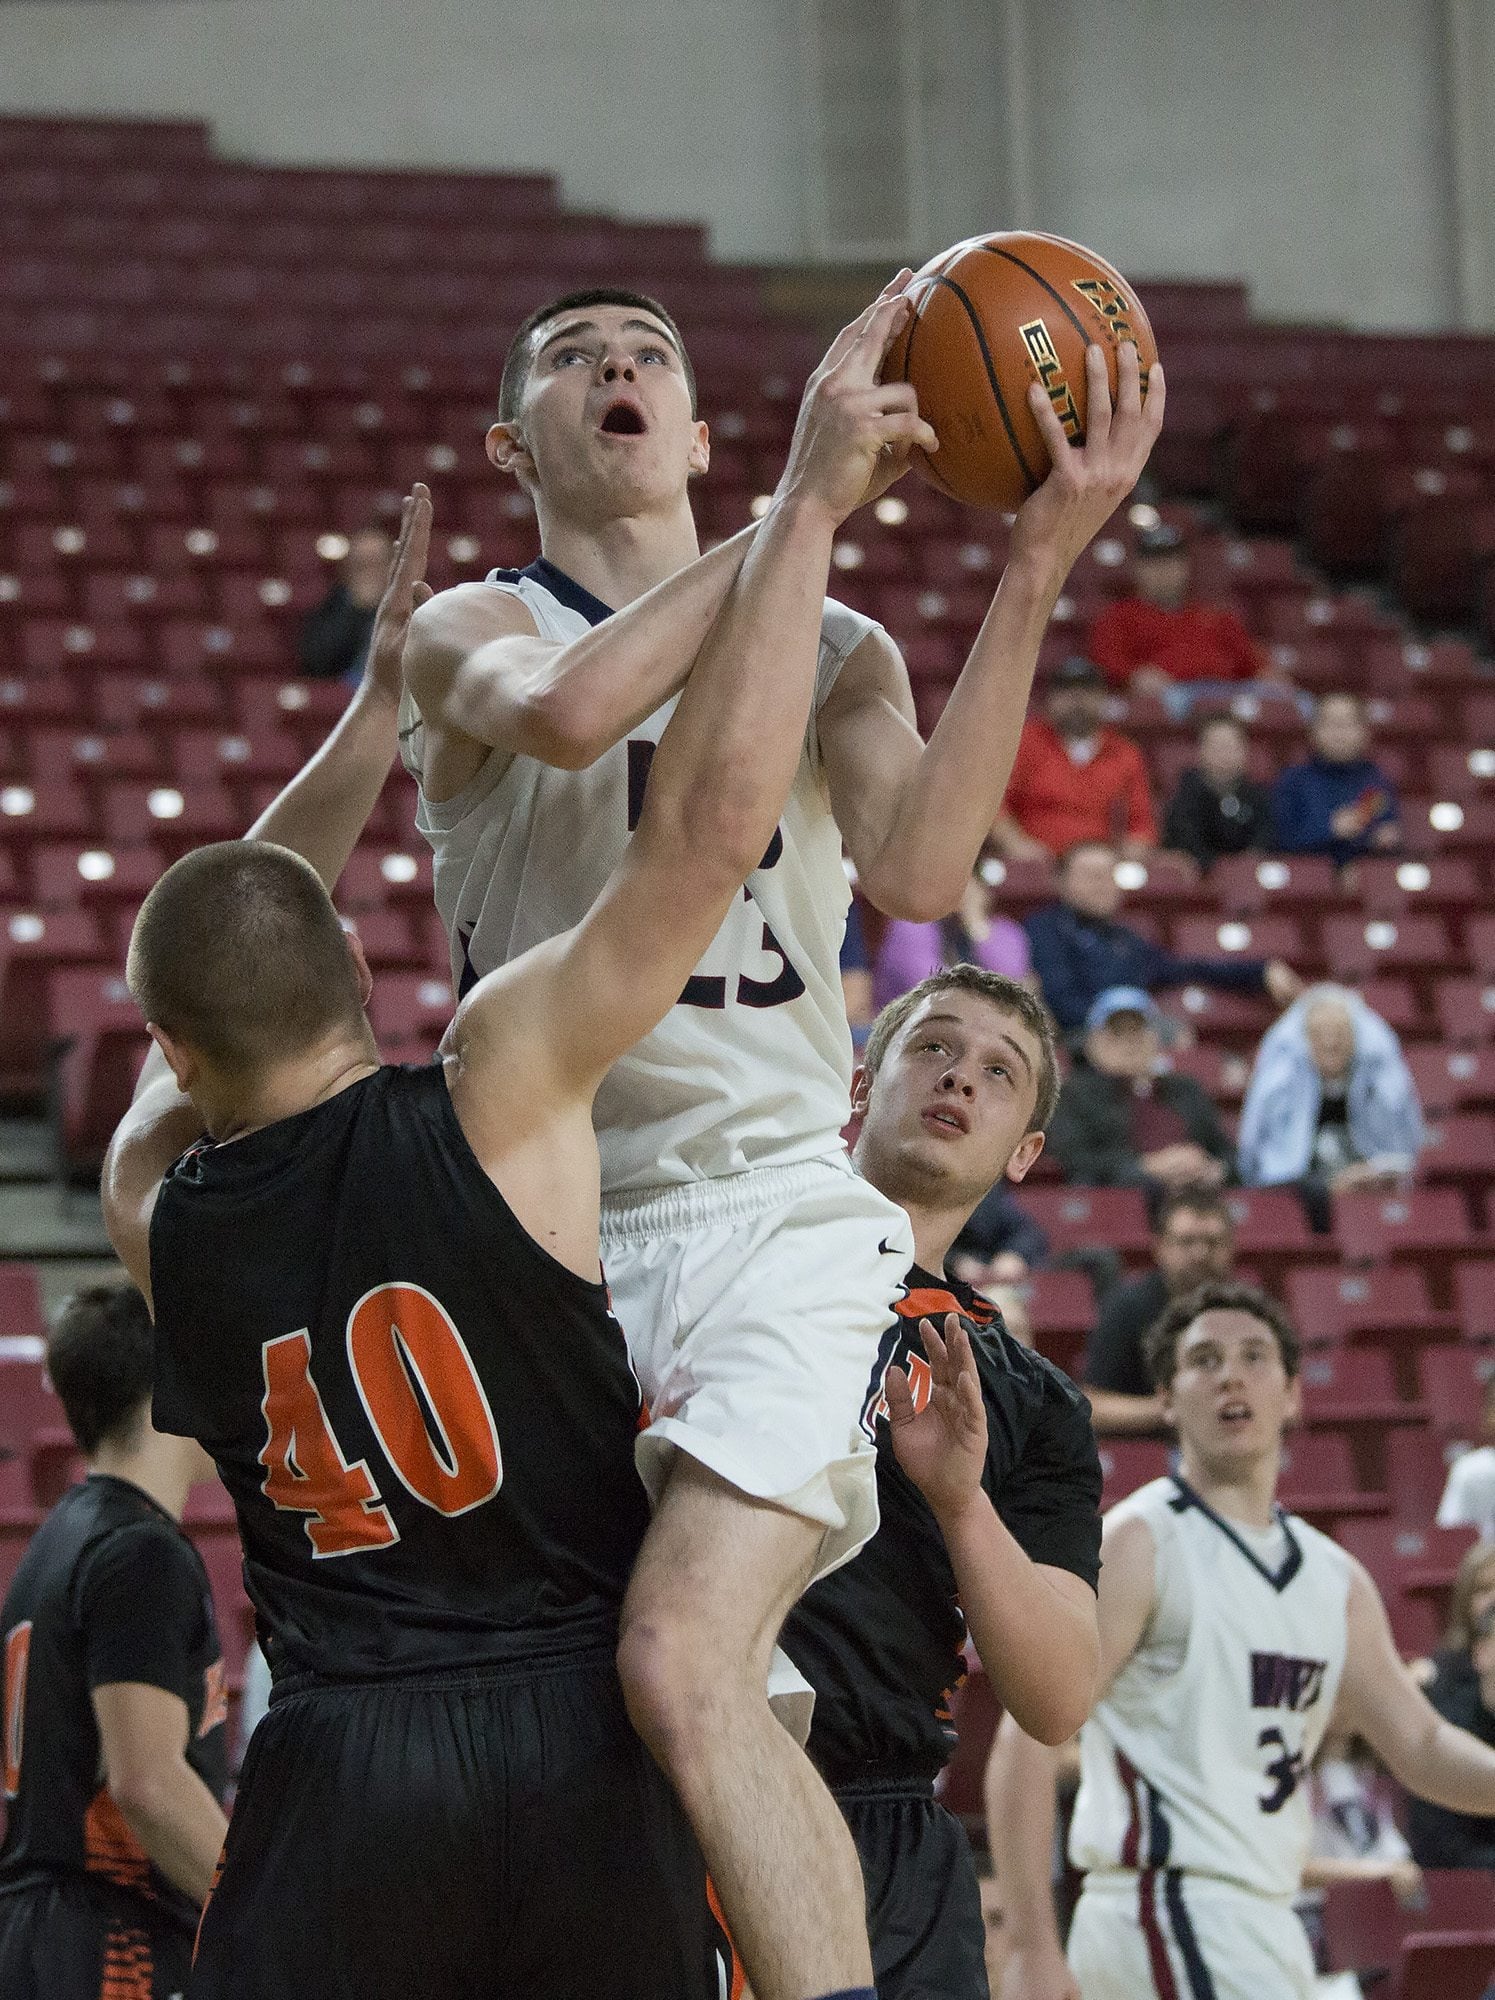 King’s Way Christian High School’s Kienan Walter drives to the basket against the defense of Kalama High School’s Hunter Esary in the first half of their game in the boys’ class 1A state basketball tournament March 5, 2016 in the Yakima SunDome in Yakima, Wash. Kalama won the game 56-41.